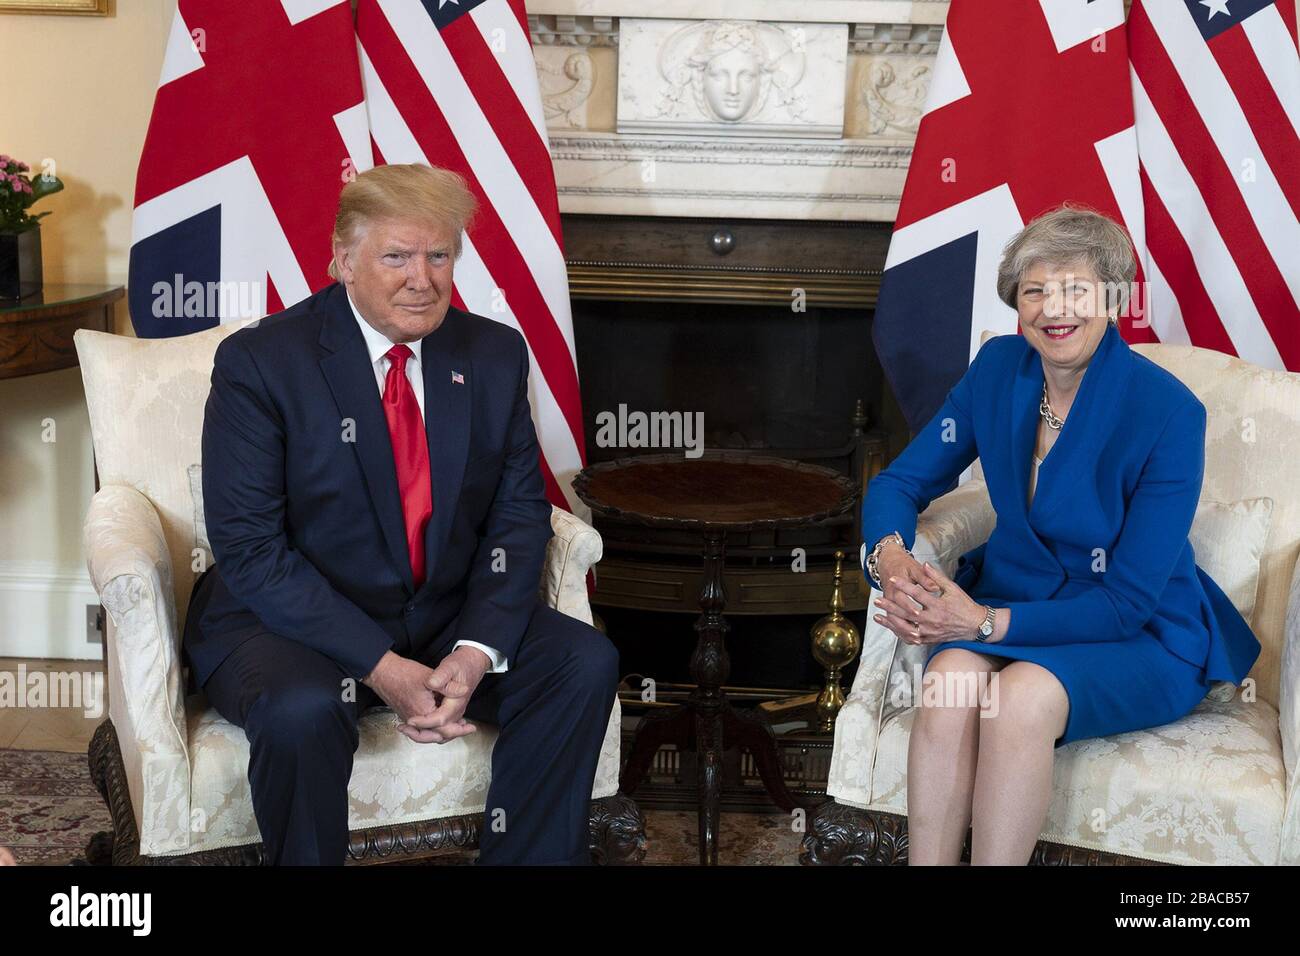 President Donald Trump meets with British Prime Minister, Theresa May, at No. 10 Downing Street, London, June 4, 2019  (BSLOC 2019 6 212) Stock Photo